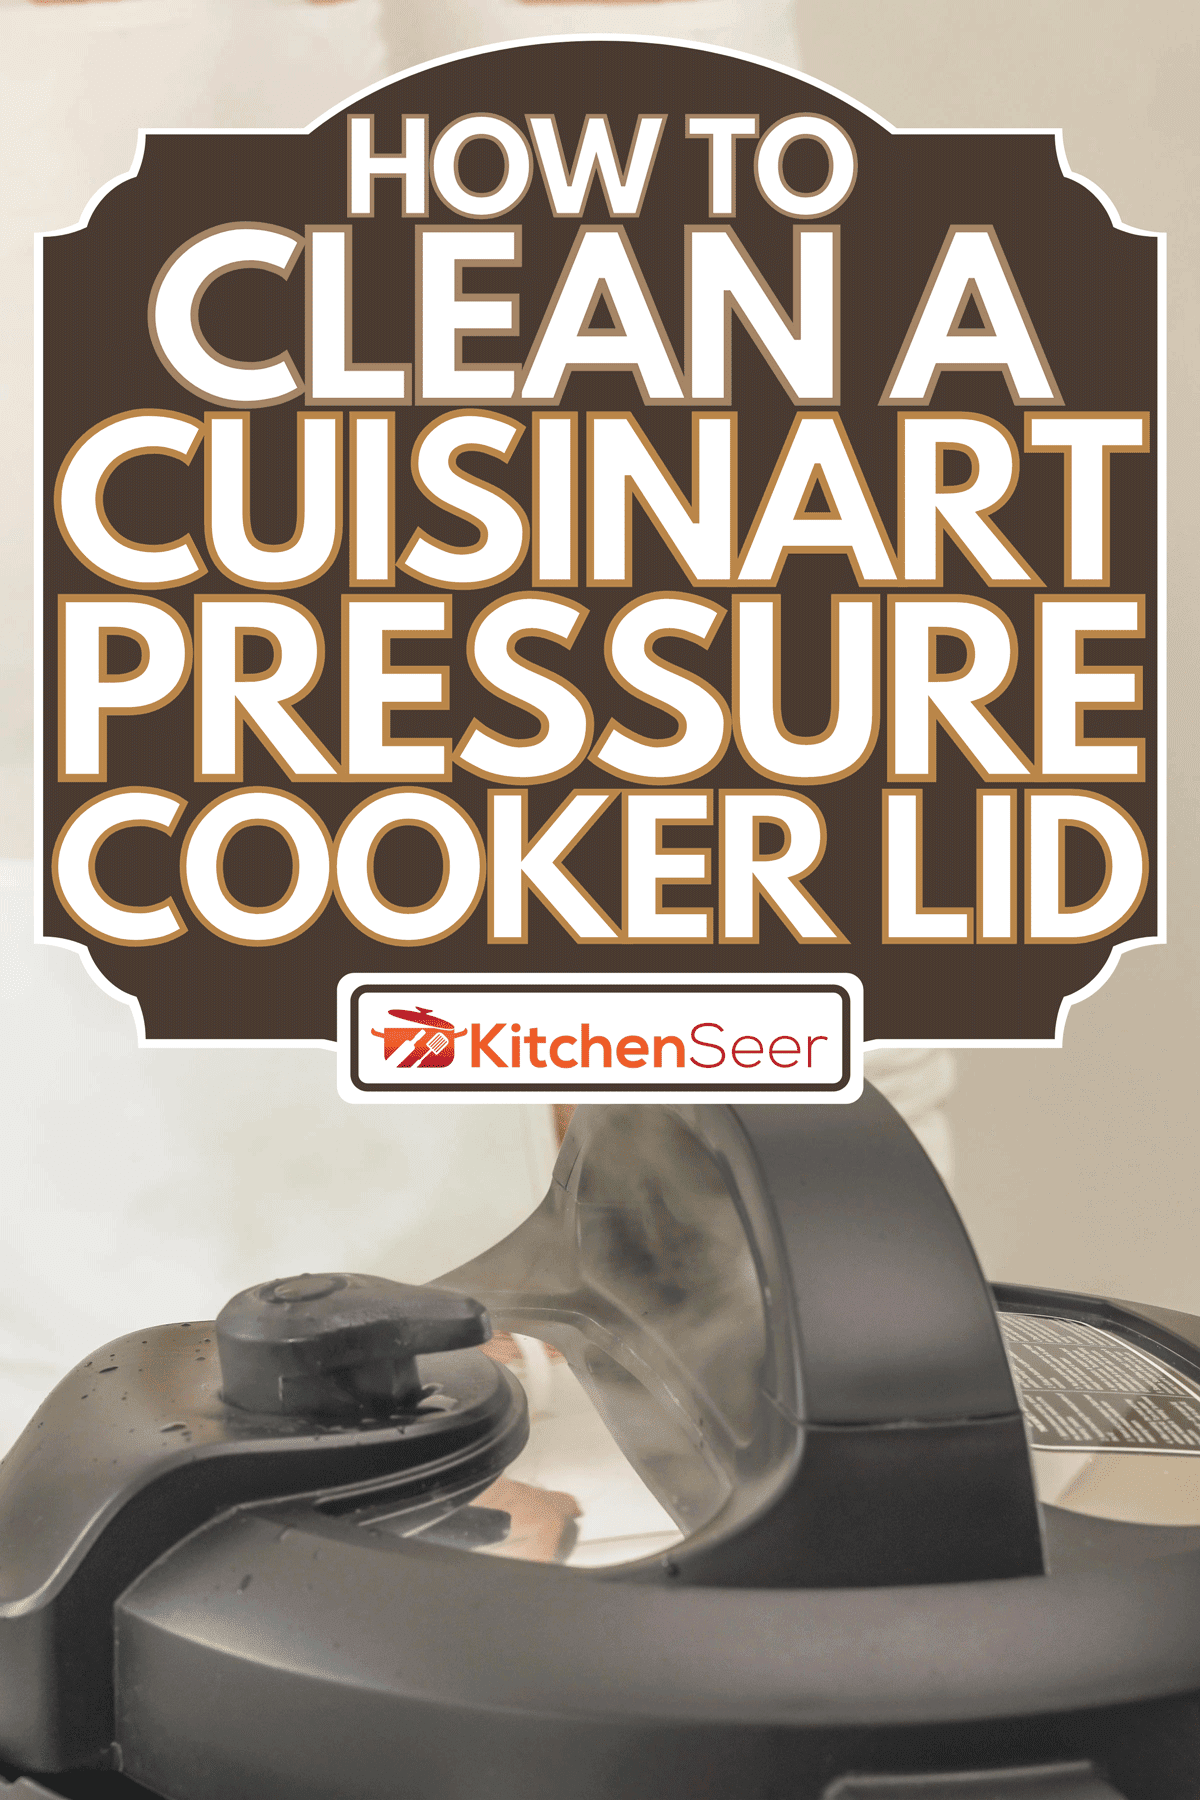 A modern electric multi cooker, How To Clean A Cuisinart Pressure Cooker Lid